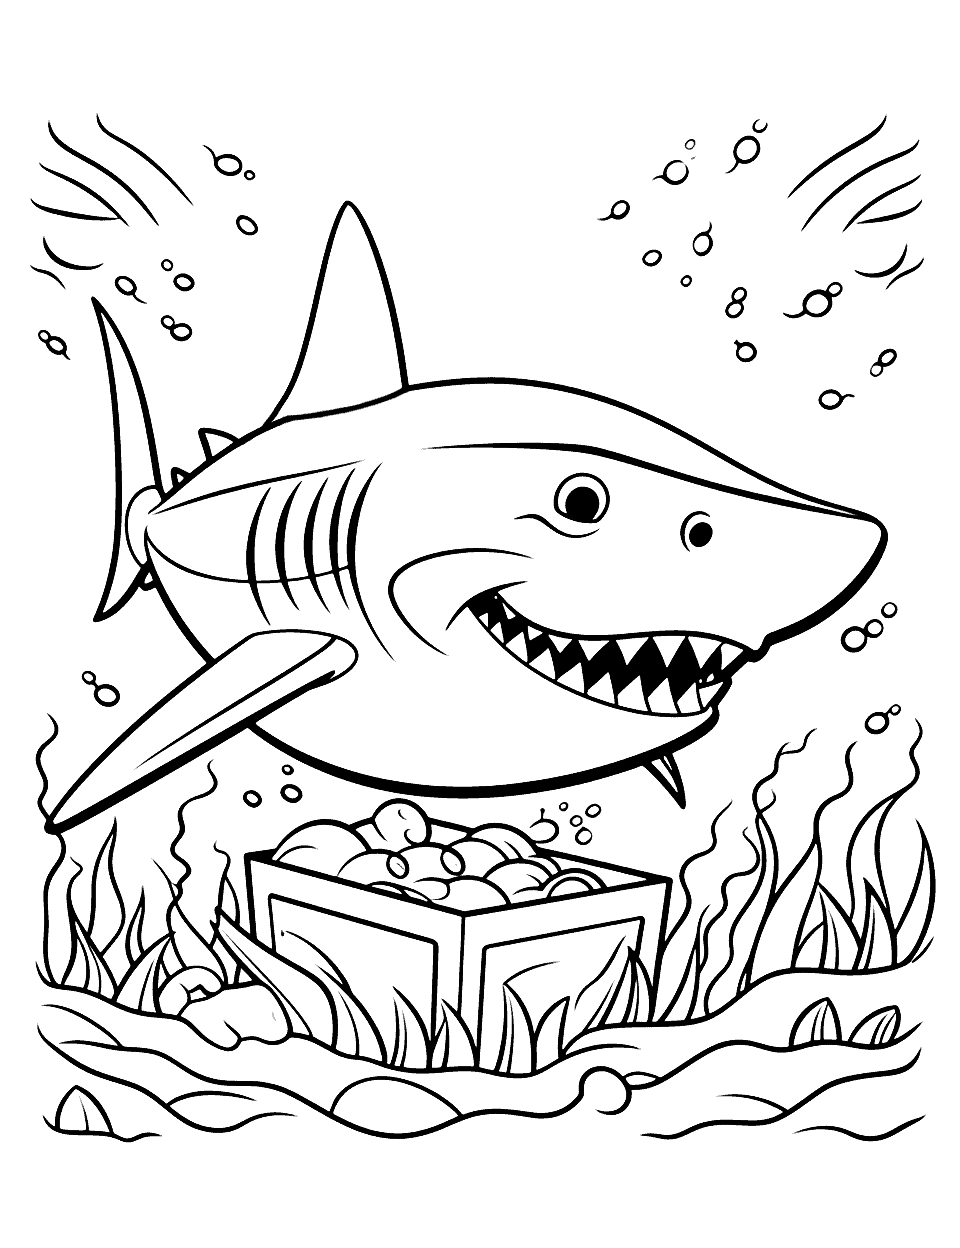 Hungry Shark and the Treasure Coloring Page - A hungry shark finding a treasure chest at the bottom of the sea.